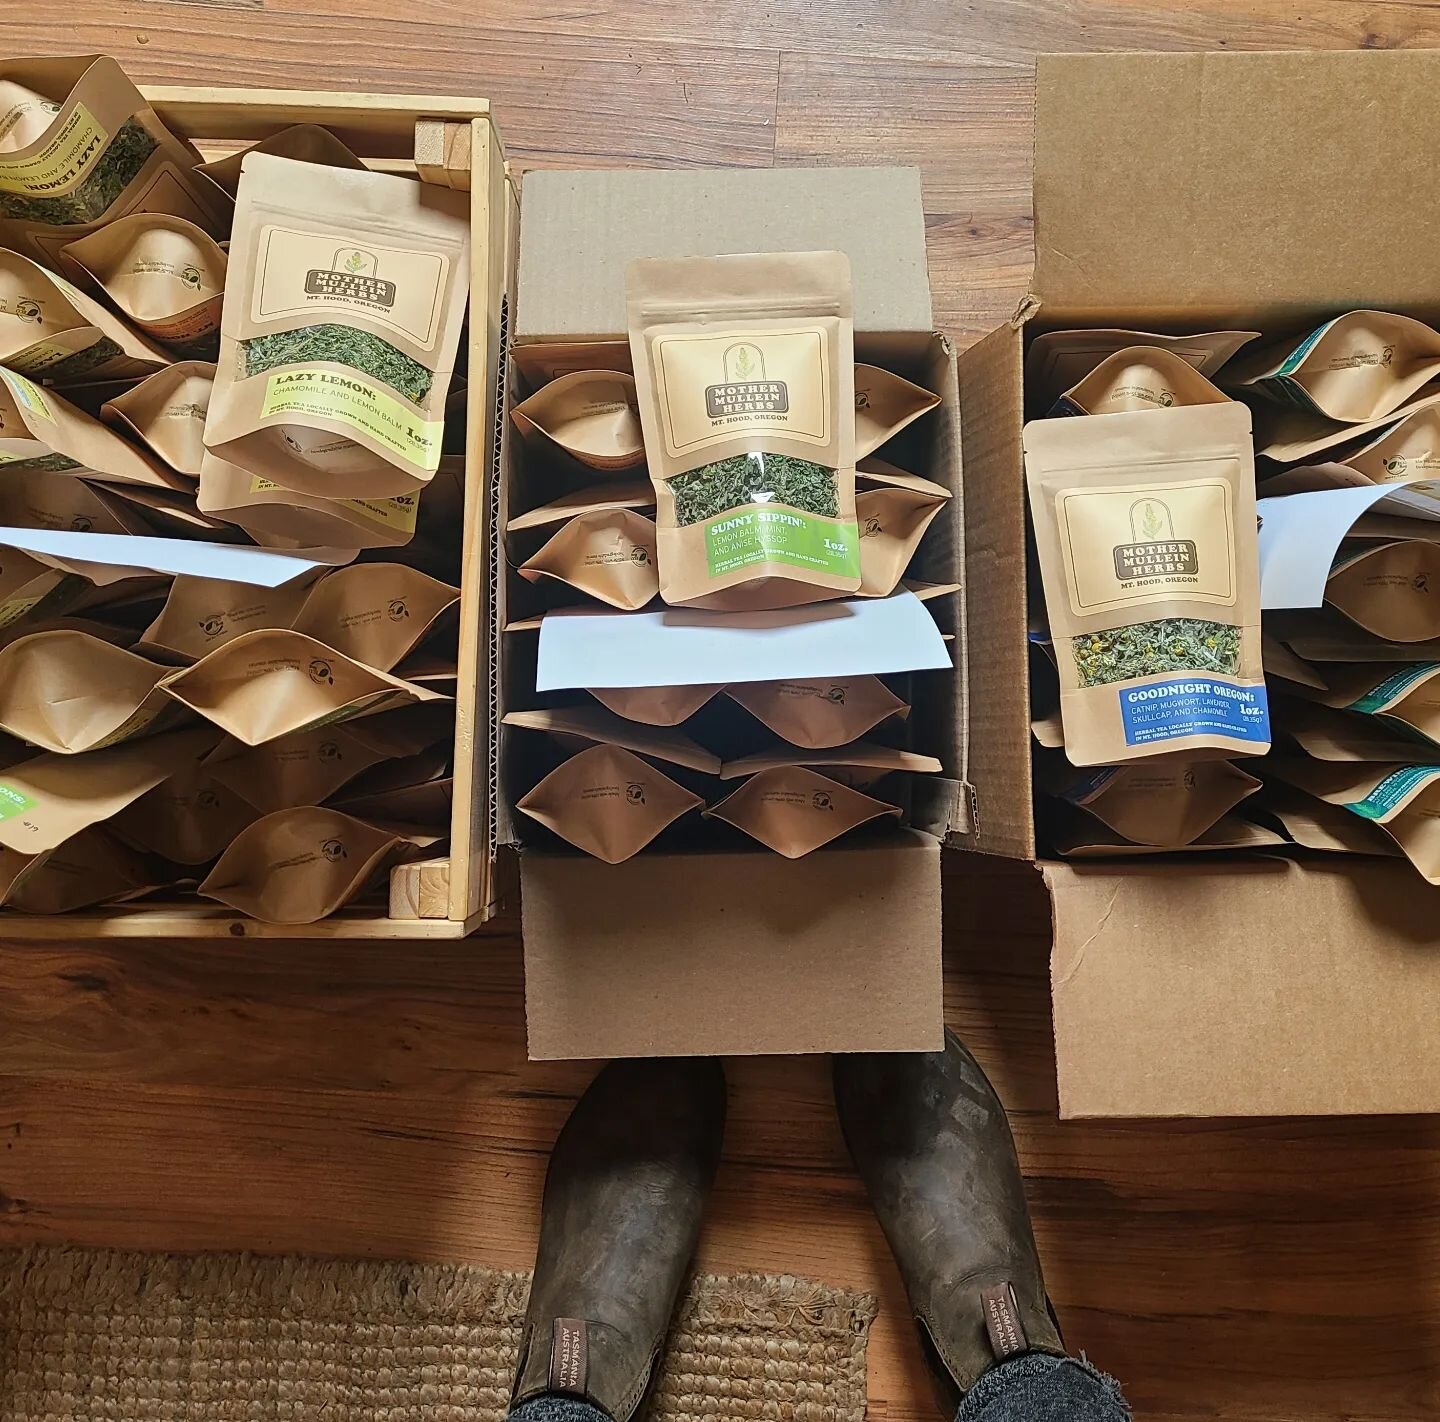 Lots of herbs headed out to our community today!
Thank you to everyone who has supported our small business so far. We are truly grateful for every single order. Keep drinking tea and using our herbs ❤️

#mothermulleinherbs 
#supportlocalbusiness 
#s